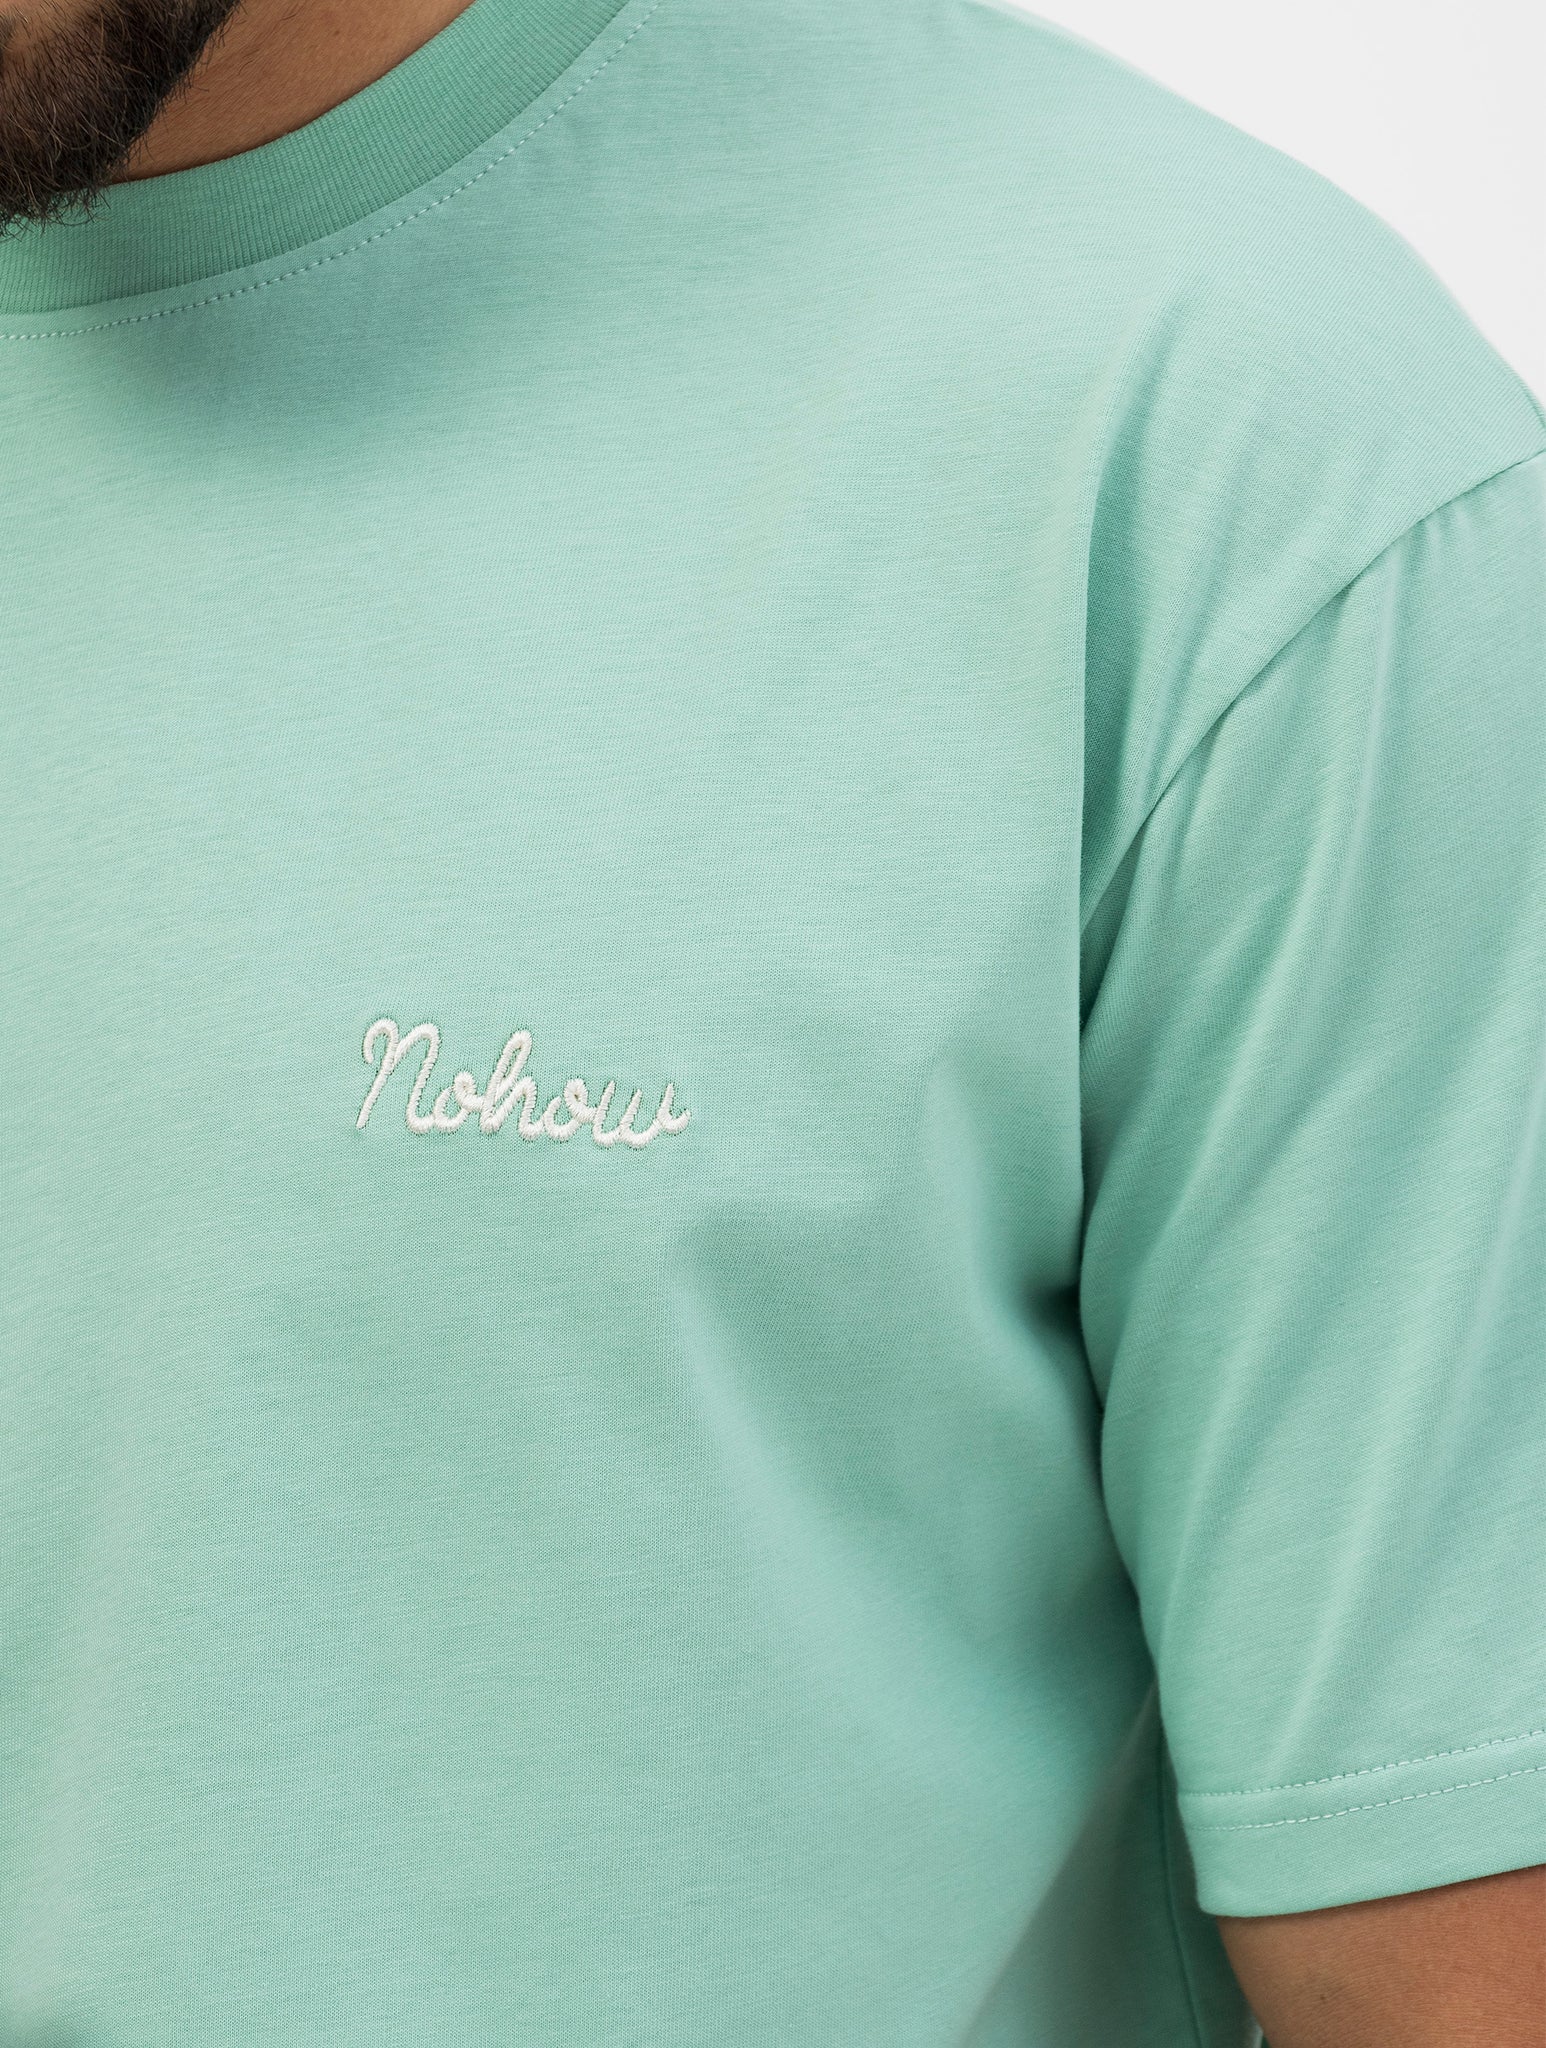 NOHOW LOGO OVERSIZED T-SHIRT IN MINT